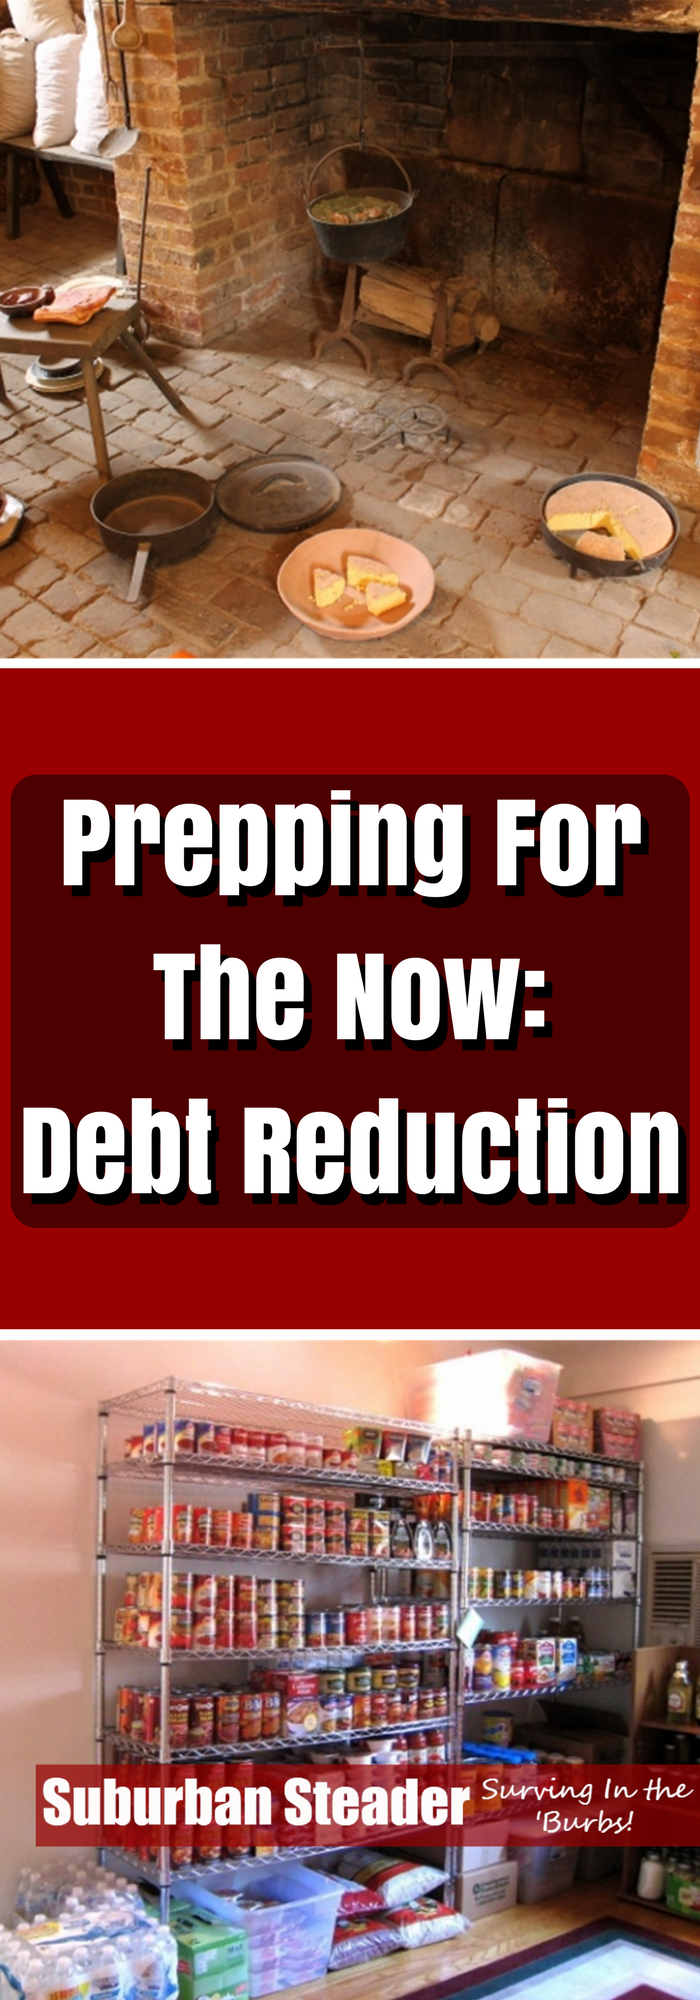 Prepping For The Now - Debt Reduction